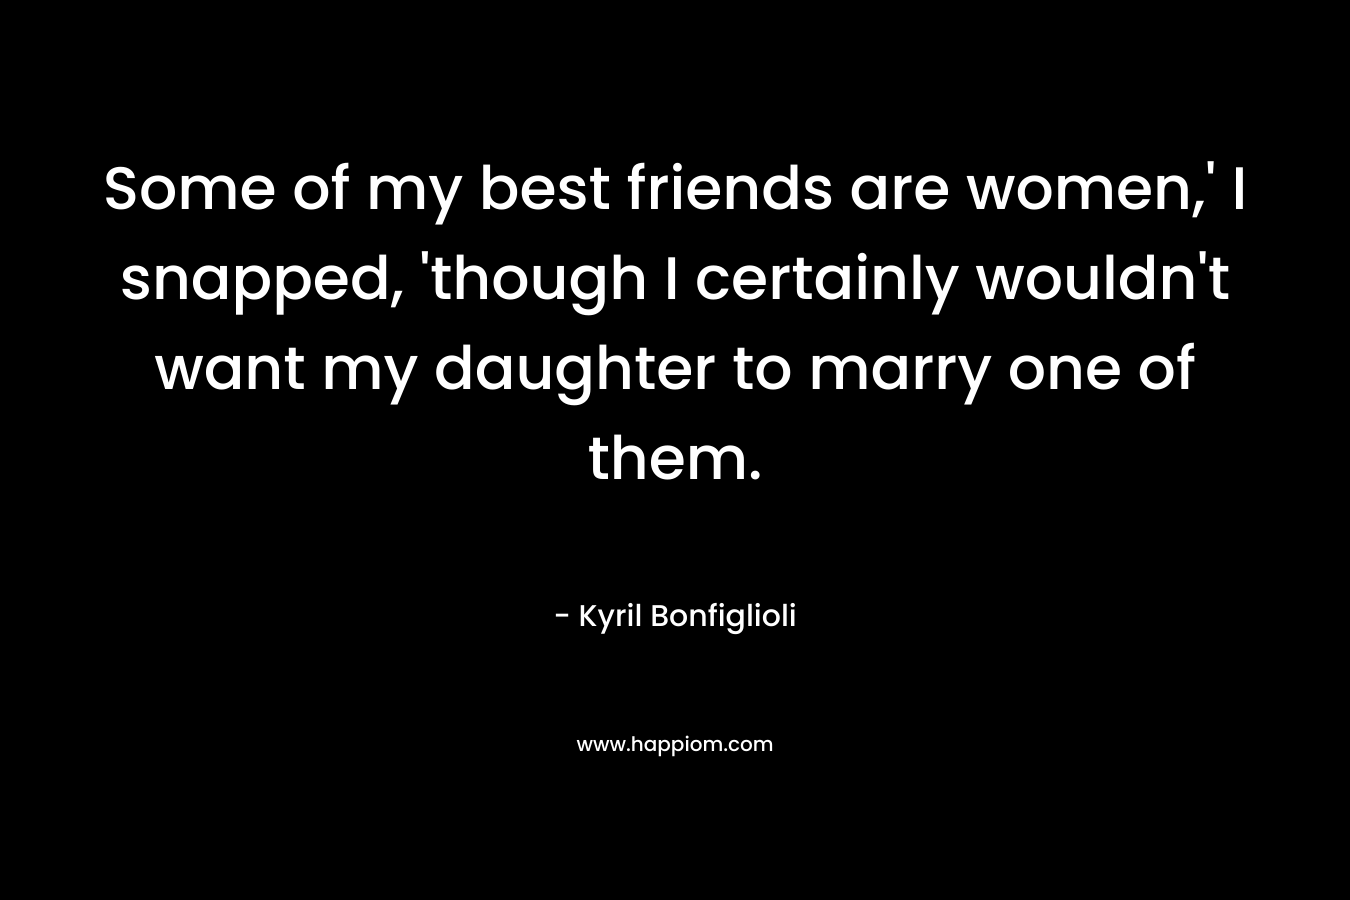 Some of my best friends are women,’ I snapped, ‘though I certainly wouldn’t want my daughter to marry one of them. – Kyril Bonfiglioli